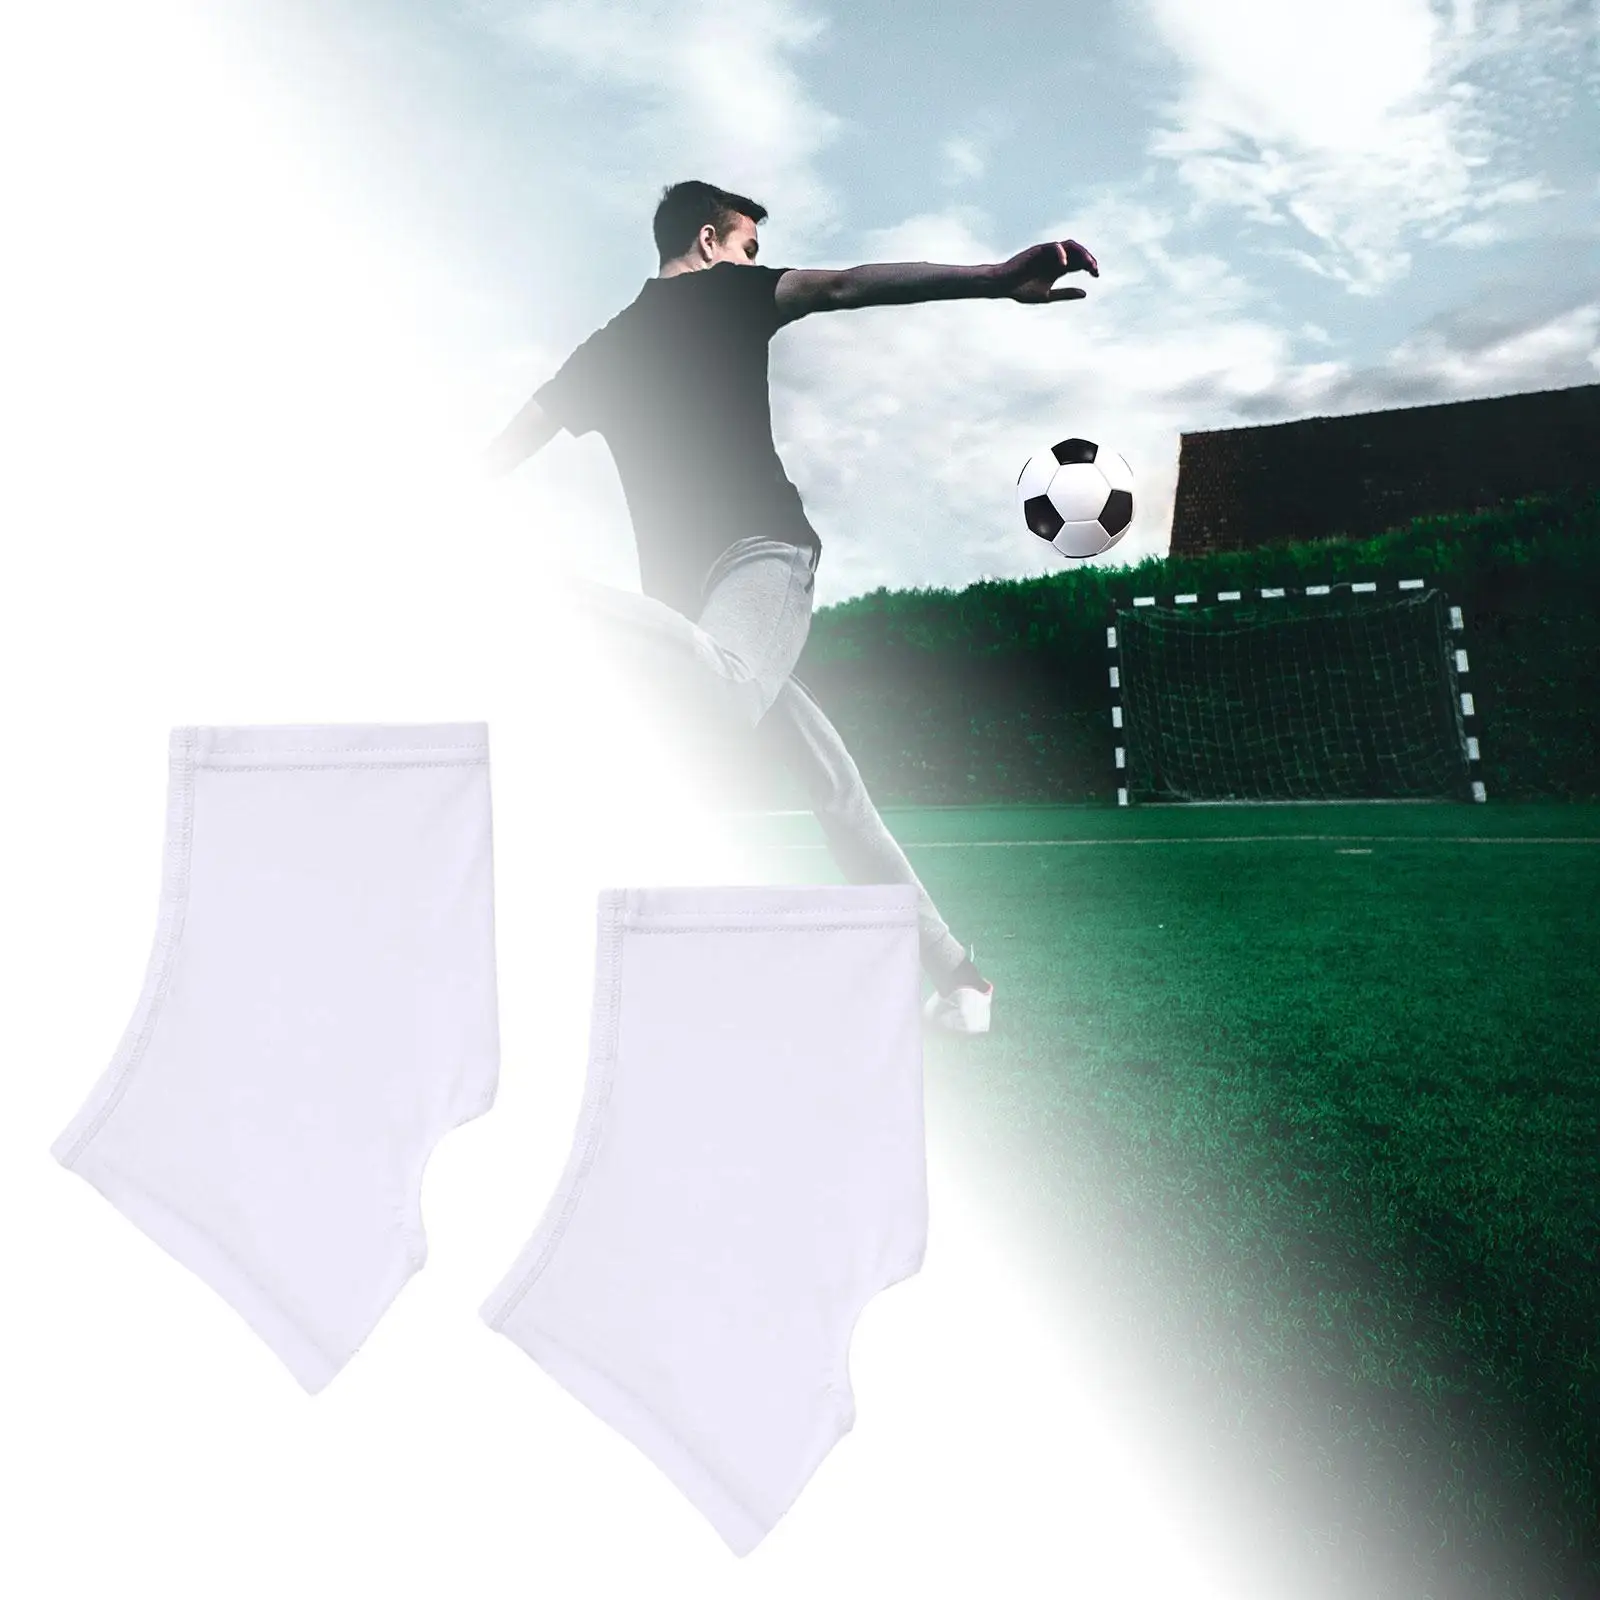 2 Pieces Spats Football Boys and Girls Turf Hockey Teenagers Lacrosse Baseball Adults Shoes Cover Nonslip Bike Youth Cleat Socks